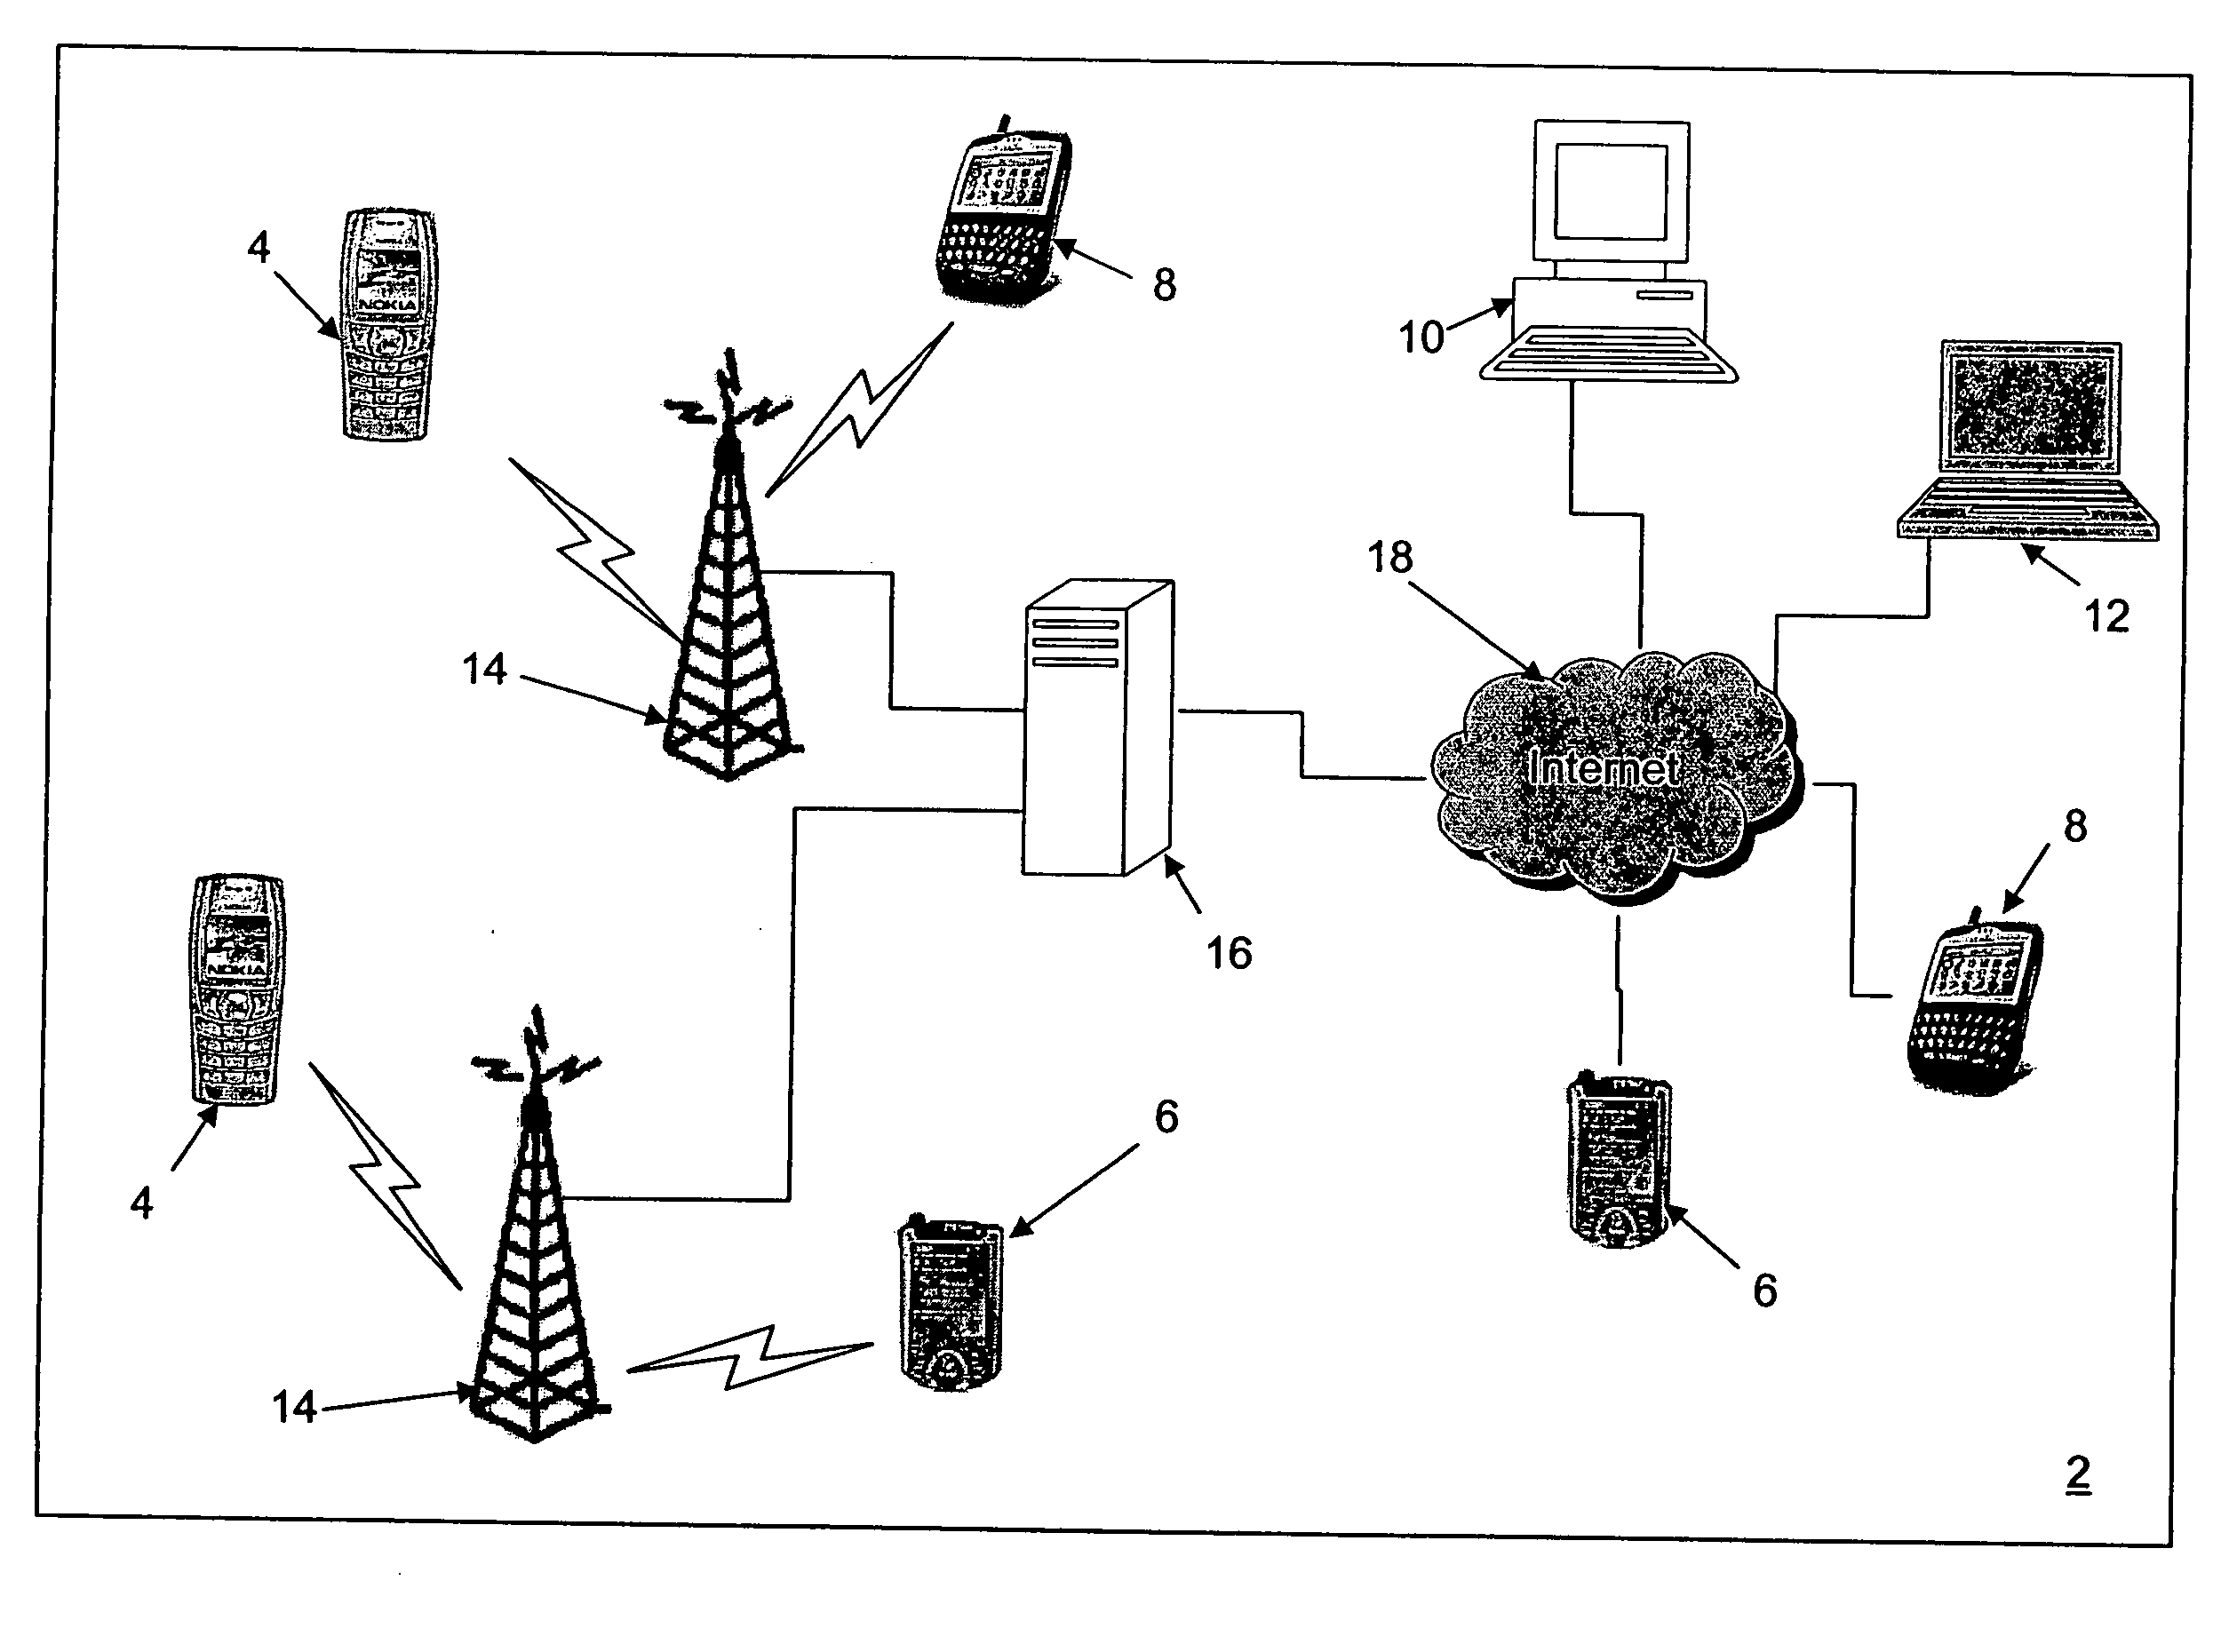 System and method for implementing a remote location acquisition application program interface